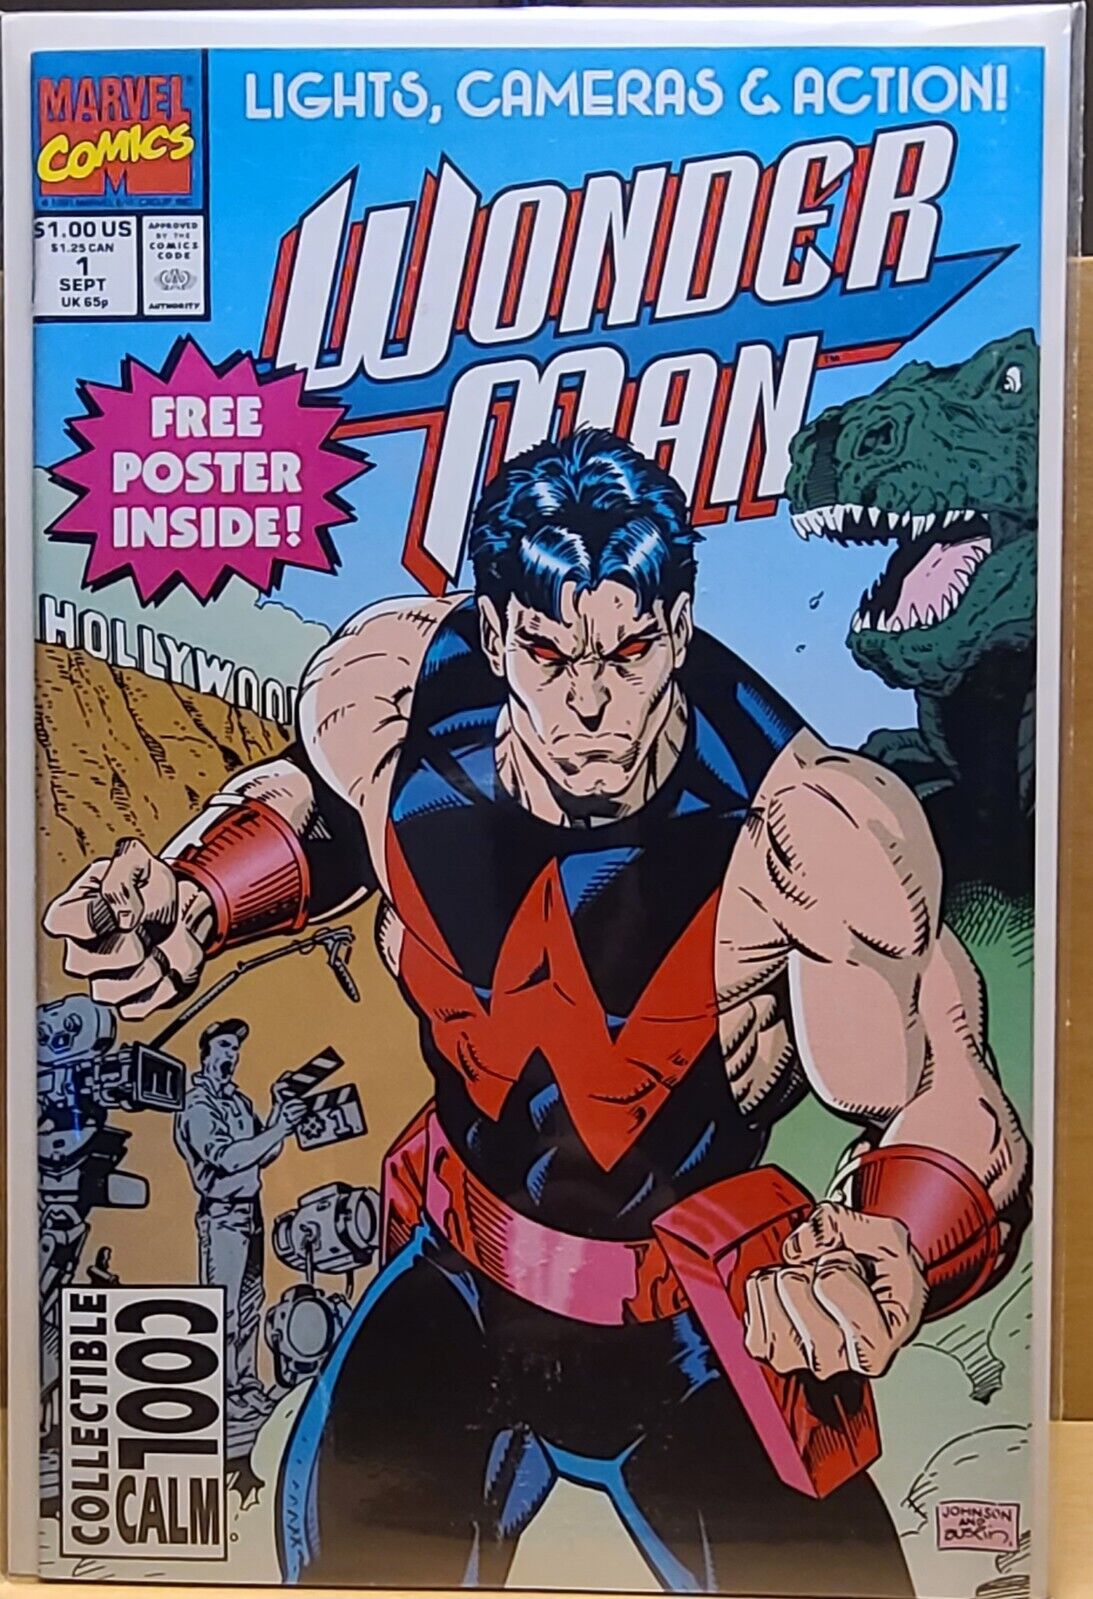 Marvel Comics Wonder man Issue #1 In ABSOLUTE PERFECT CONDITION